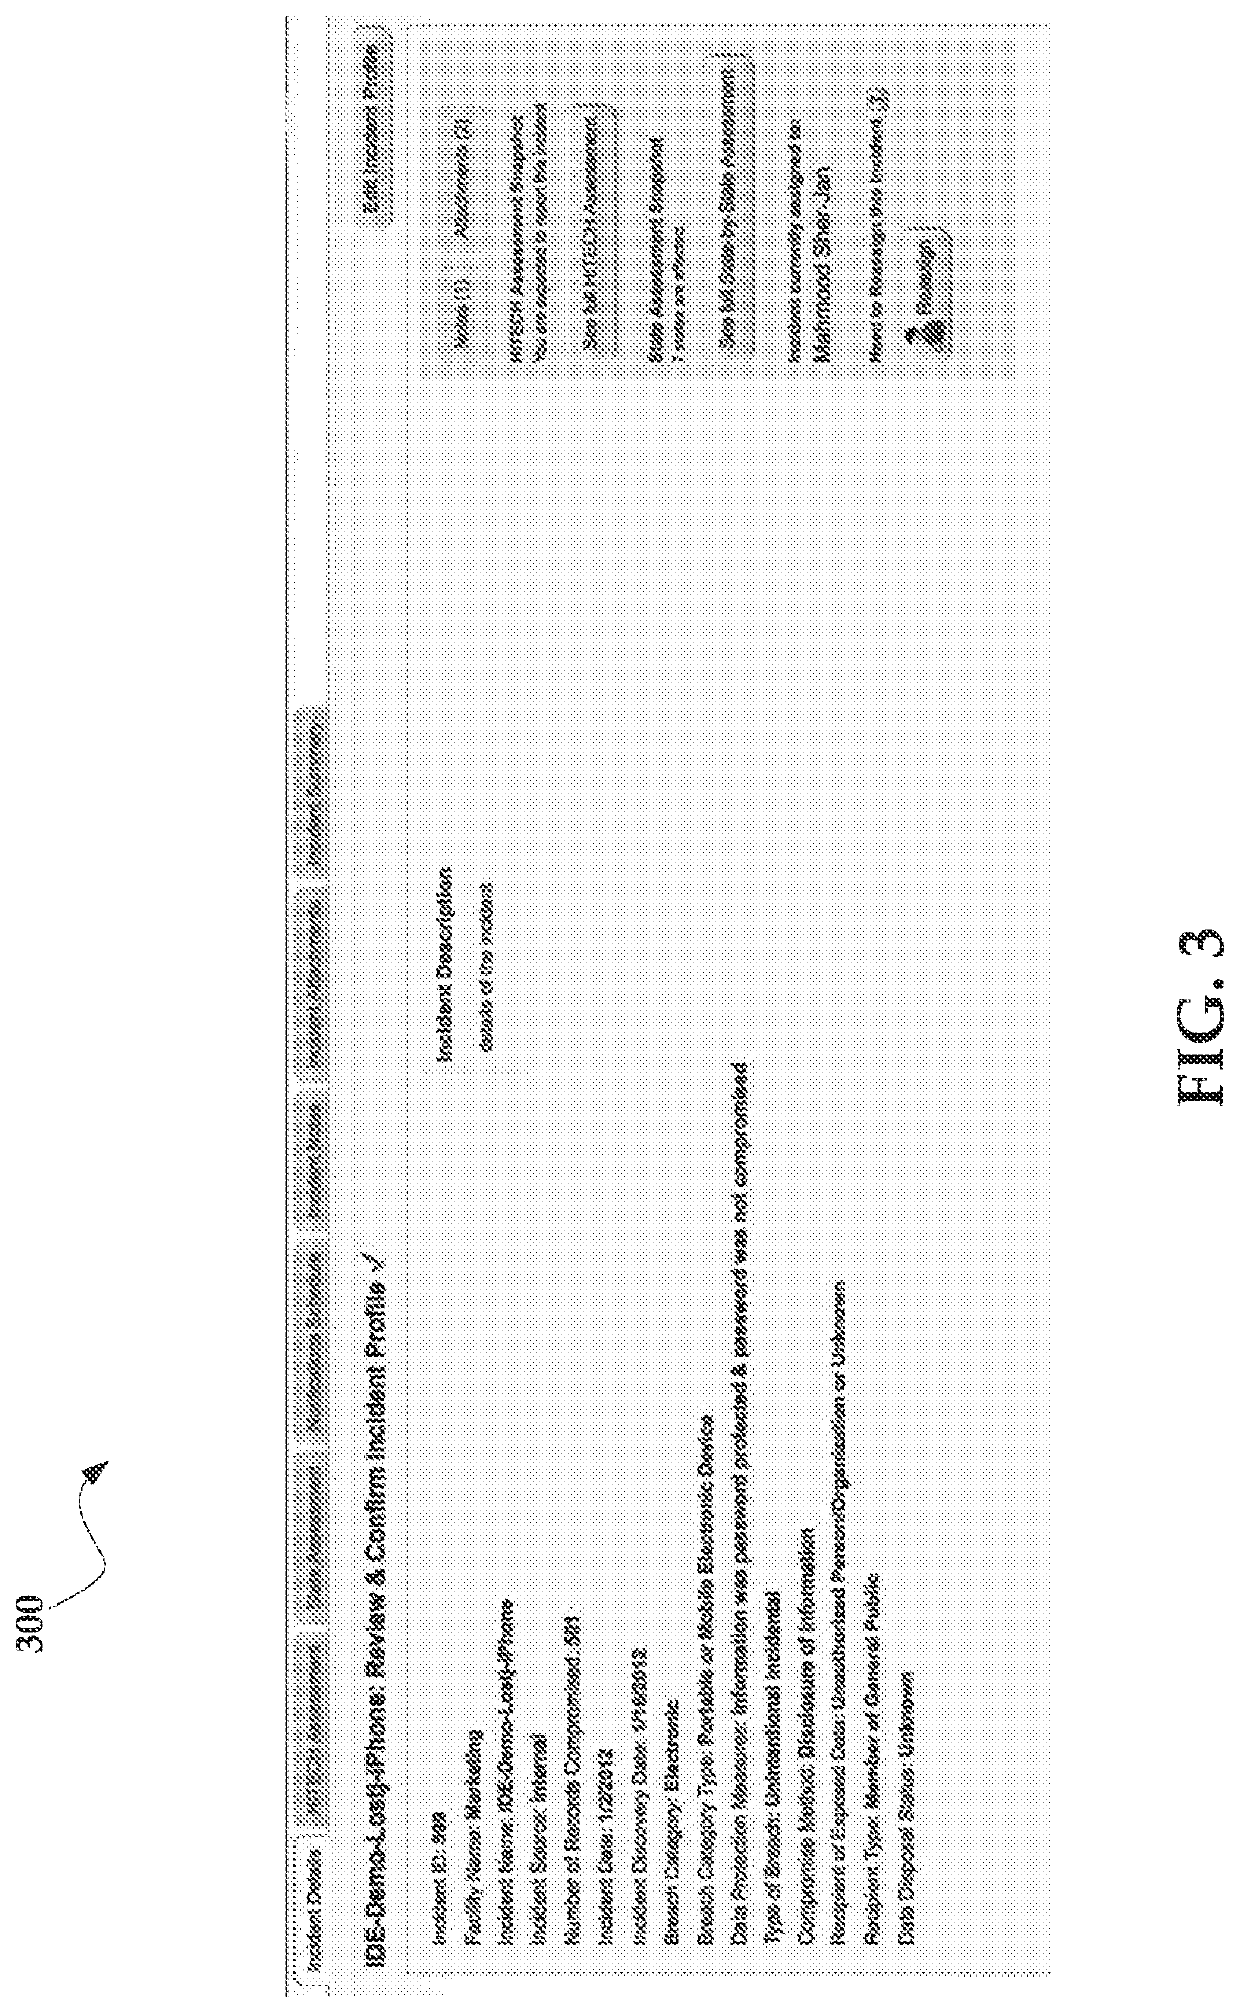 Systems and methods for managing data incidents having dimensions